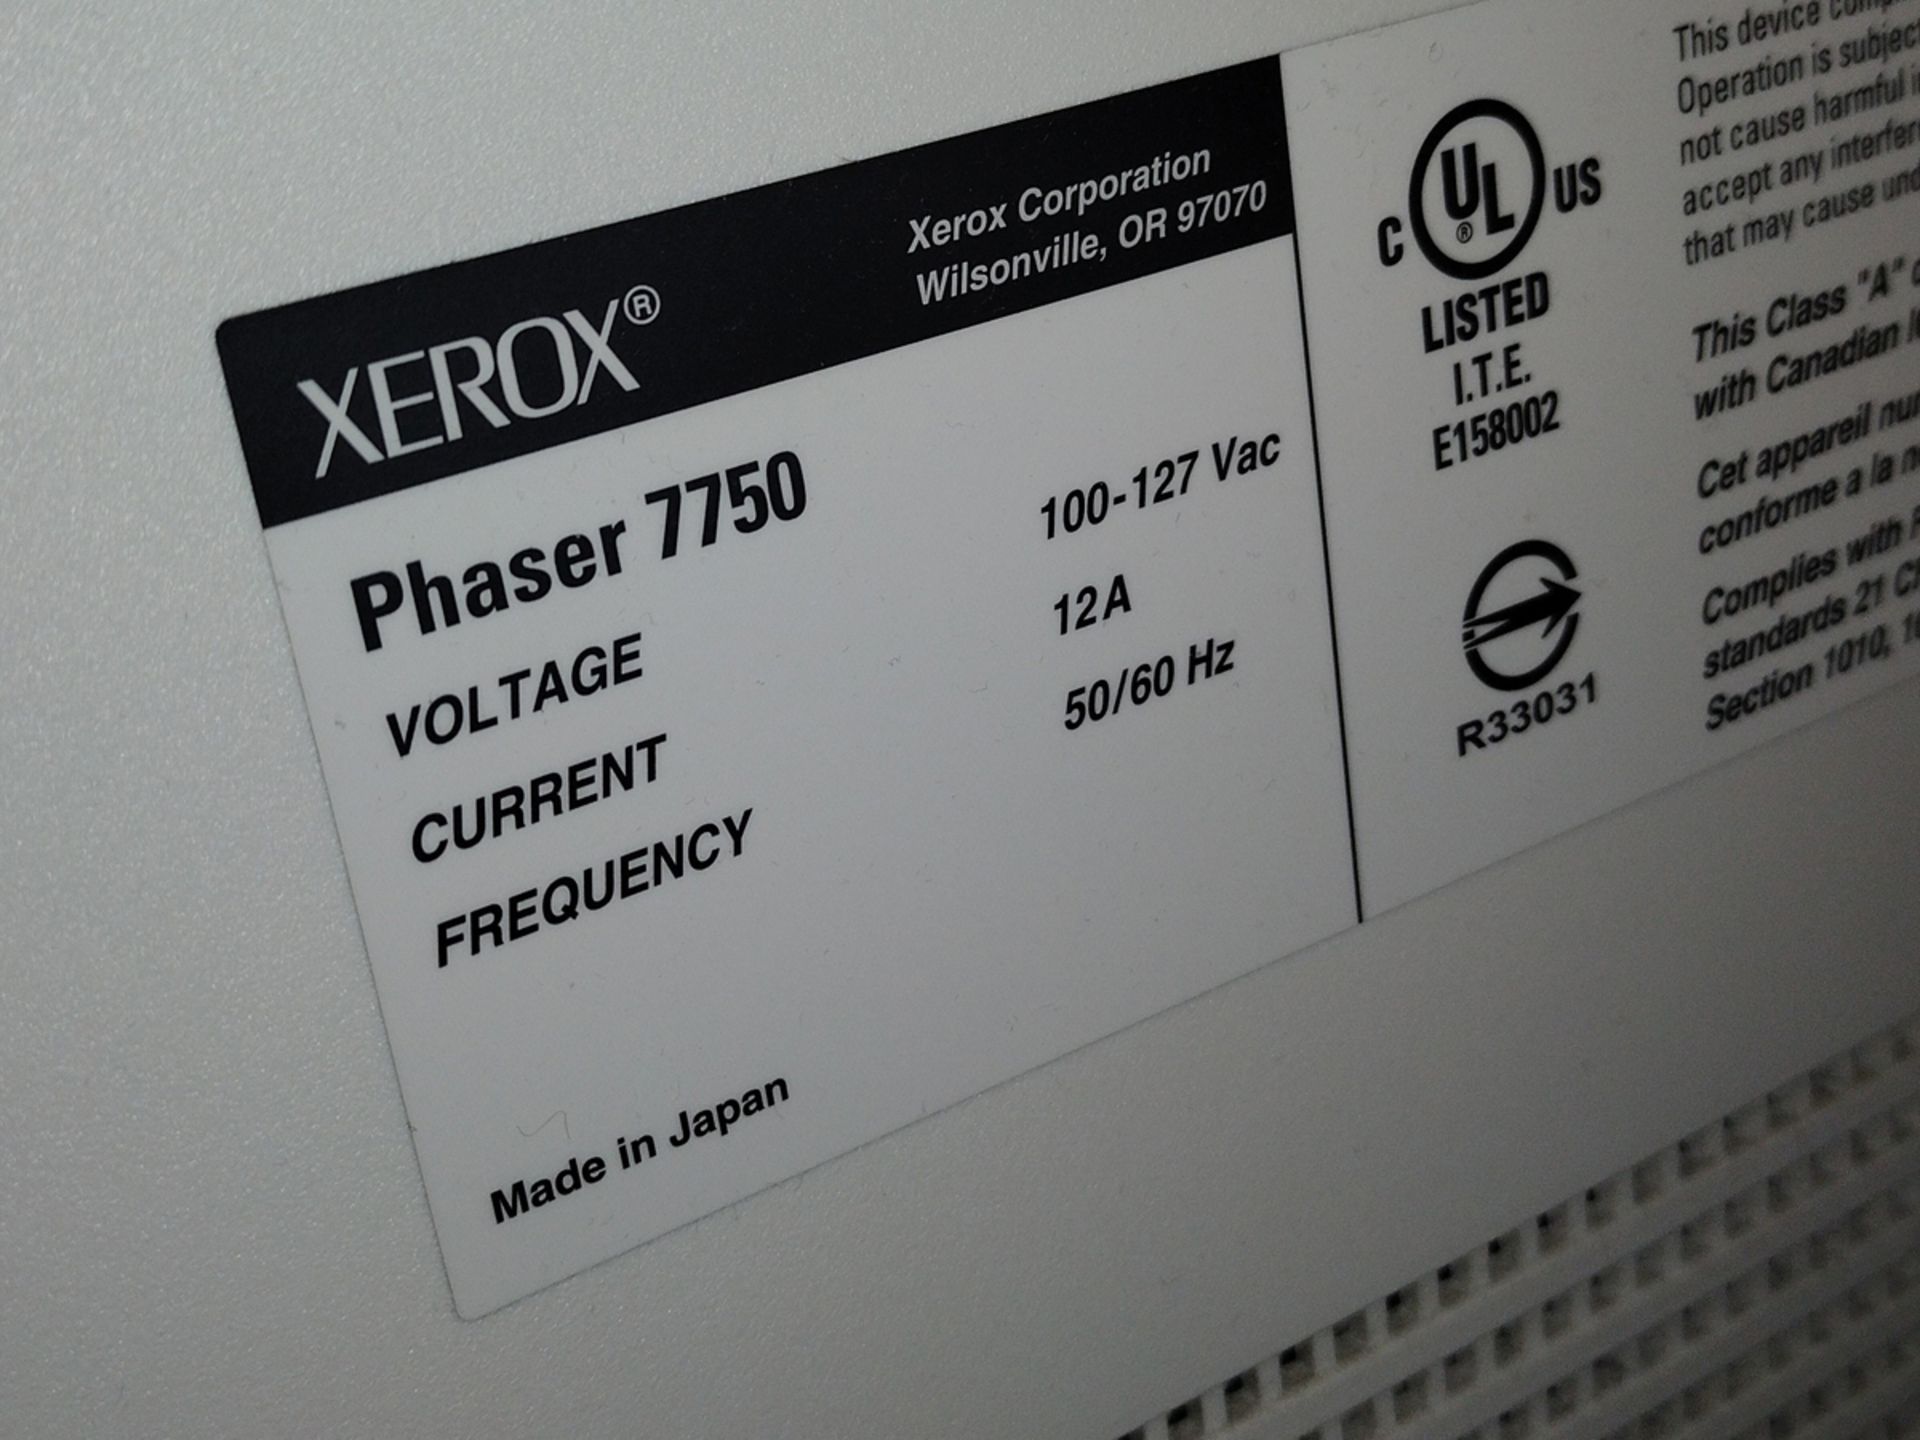 Xerox Phaser 7750 Color Laser Printer - Image 4 of 5